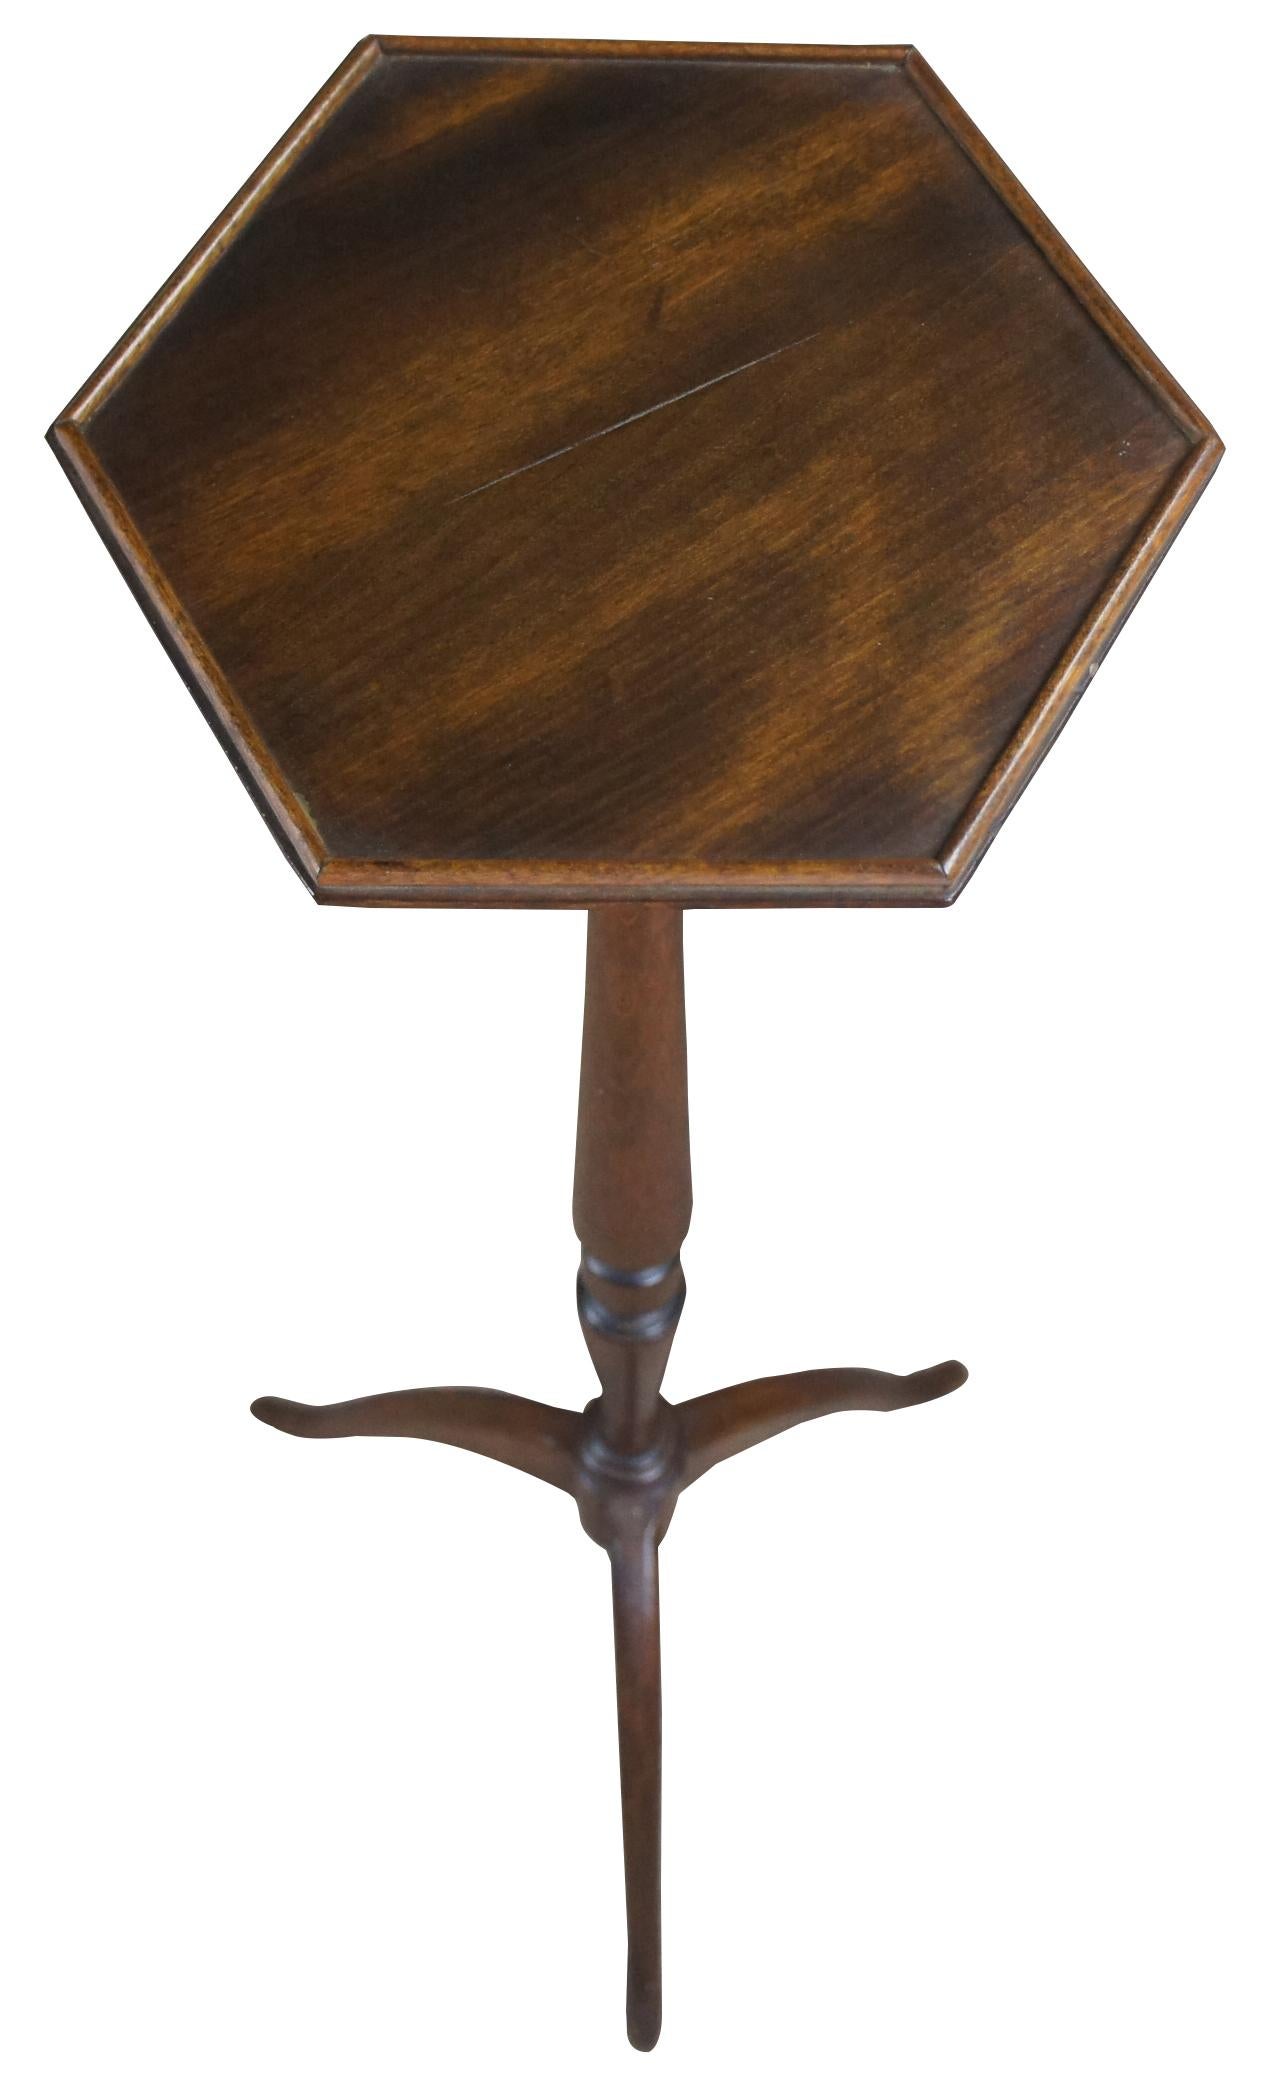 J&R Furniture Federal Walnut Hexagon Candle Stand Pedestal Table Kettle Plant In Good Condition For Sale In Dayton, OH